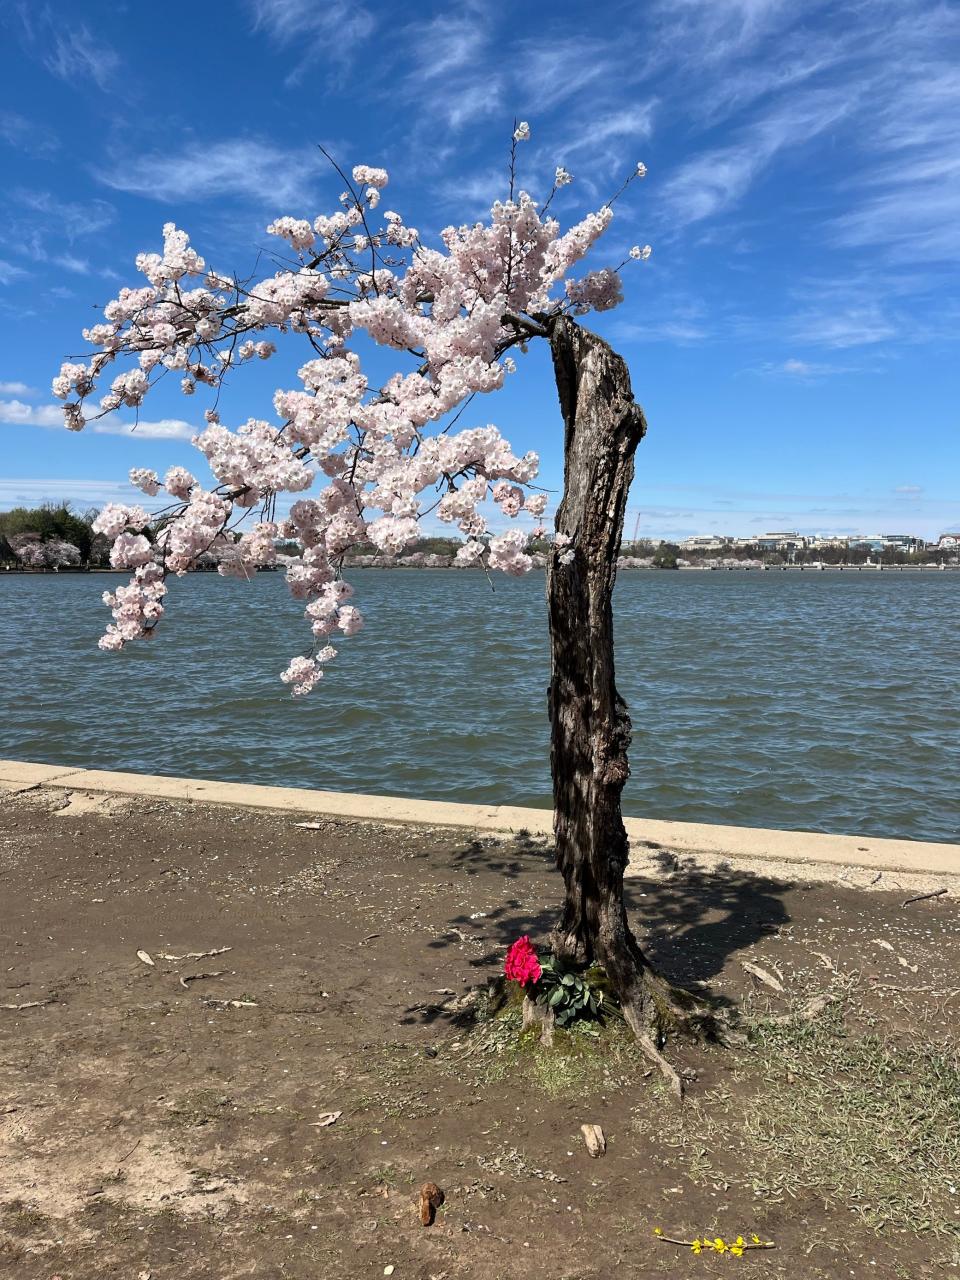 Stumpy, Washington, D.C.'s beloved short cherry tree on the Tidal Basin, is slated for removal later this year.